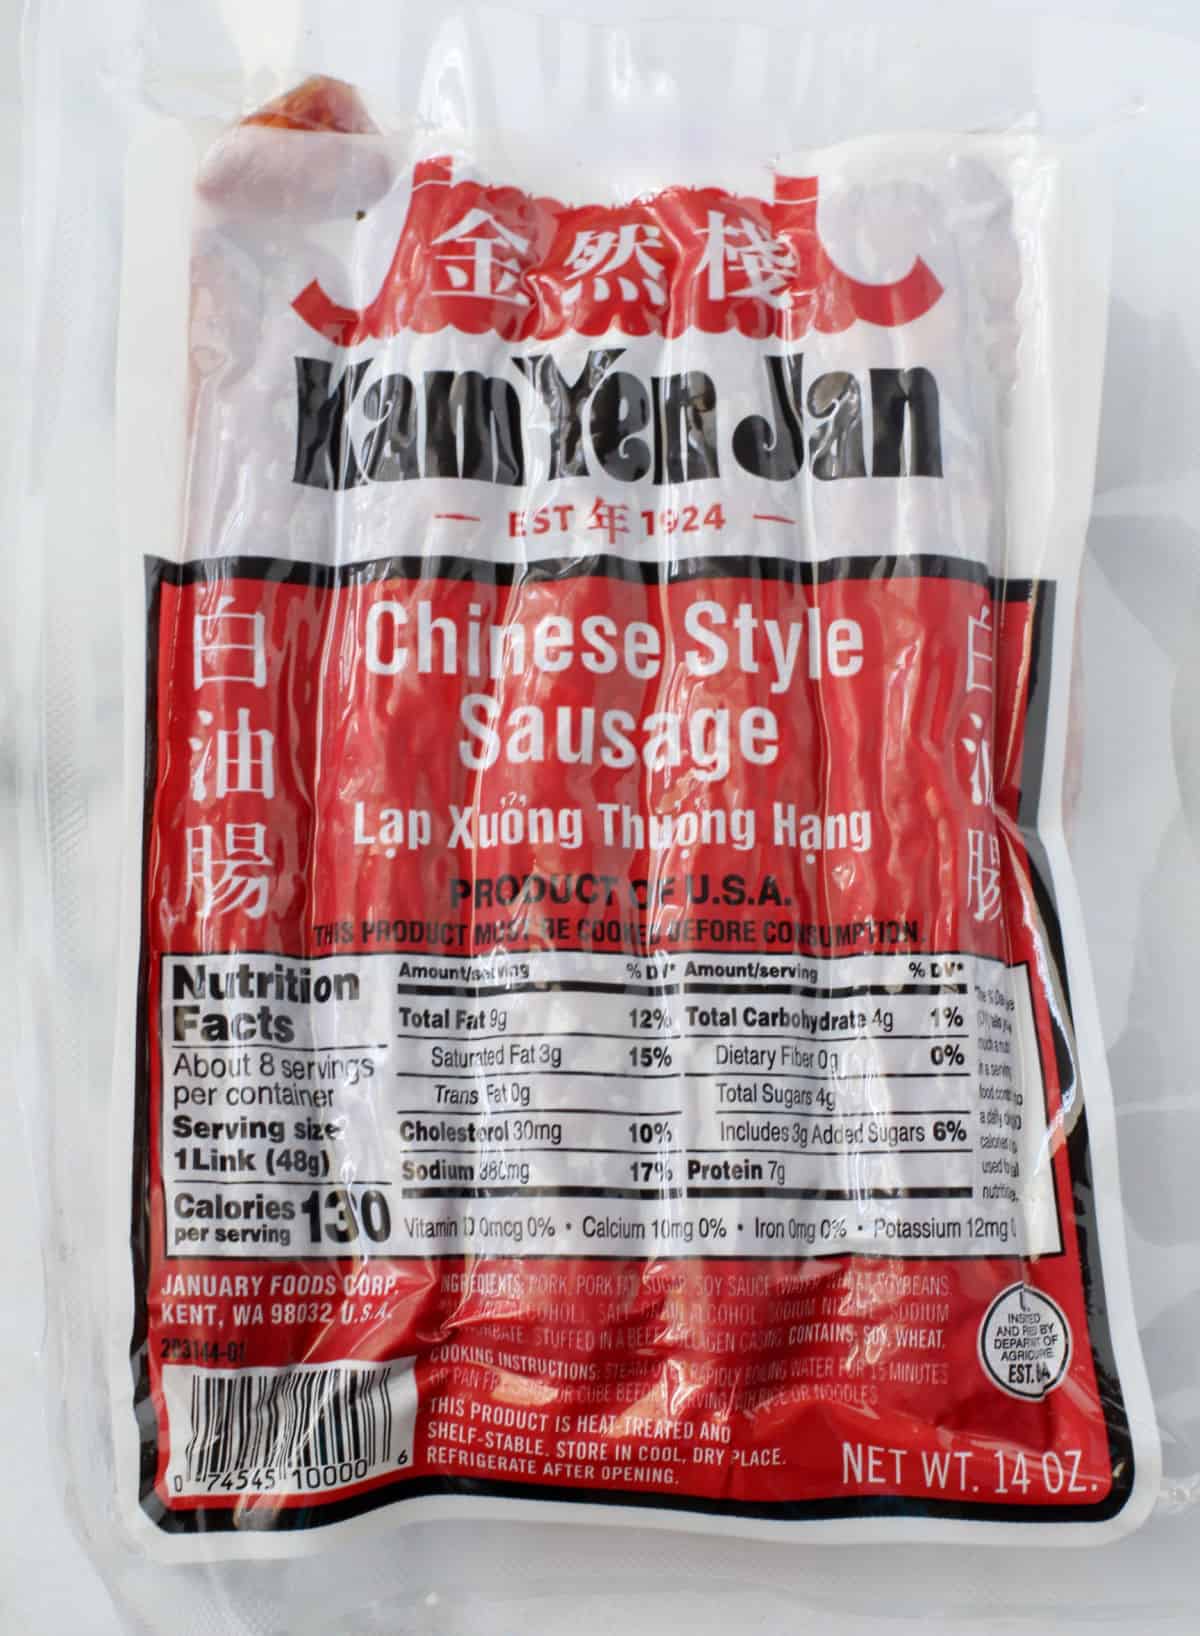 Package of Chinese-style sausage.